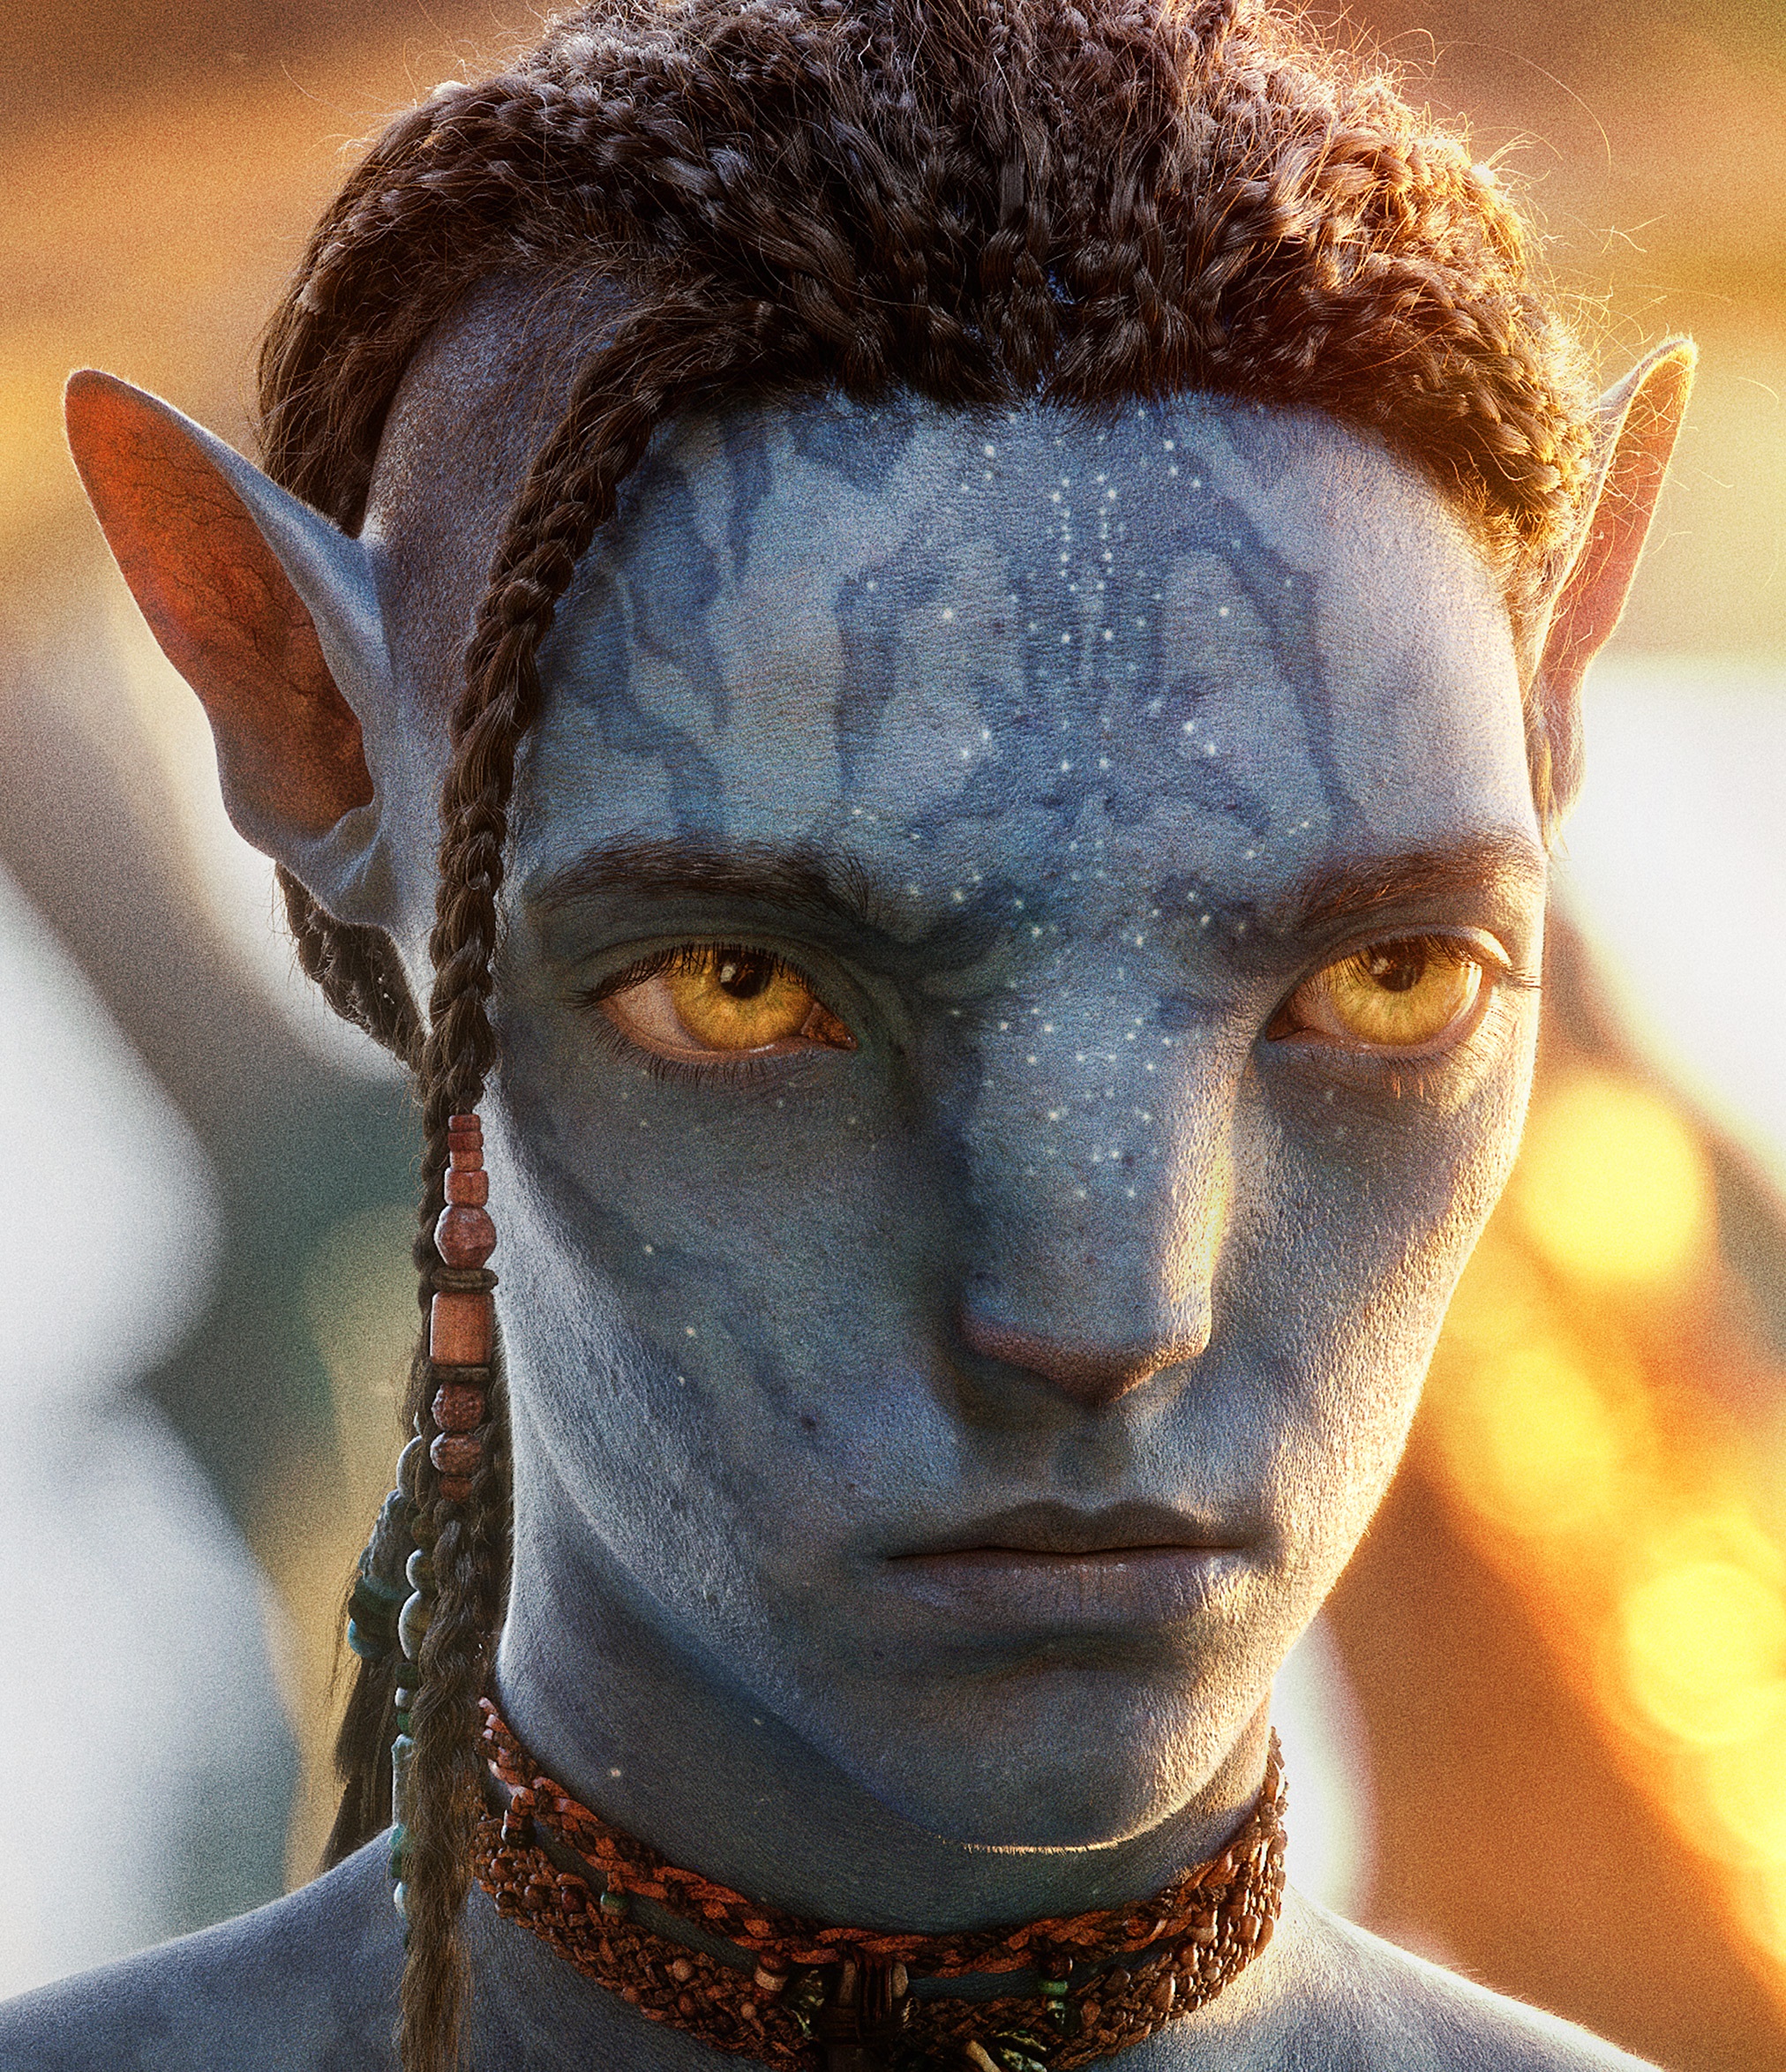 Avatar The Way of Water: James Cameron's sequel feels like badly